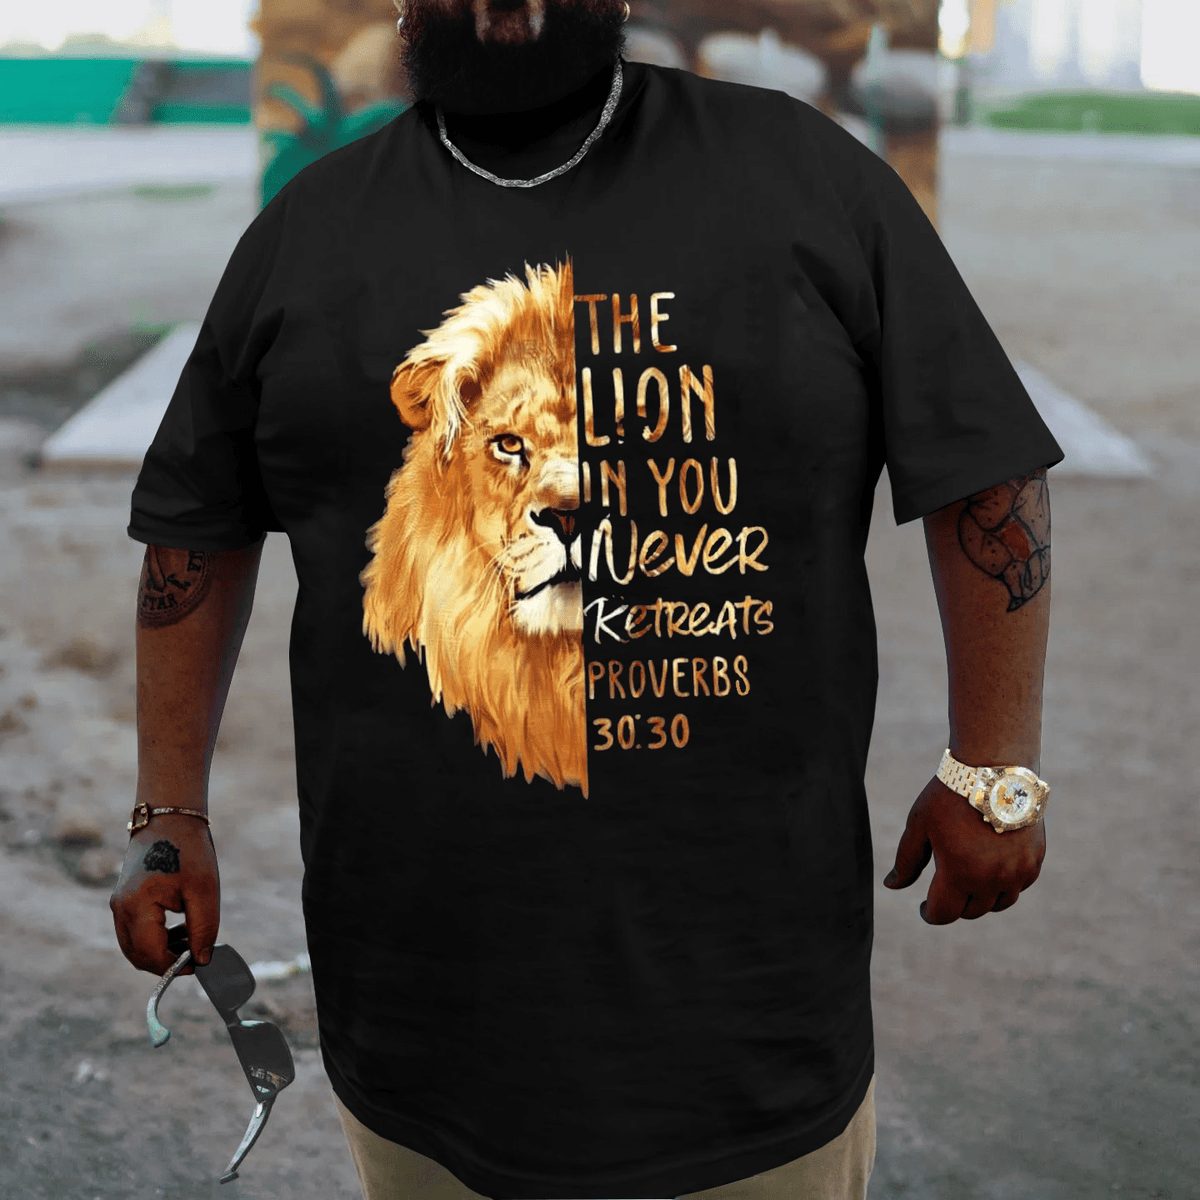 Proverbs 30:30 The Lion in You Never Retreats T-shirt